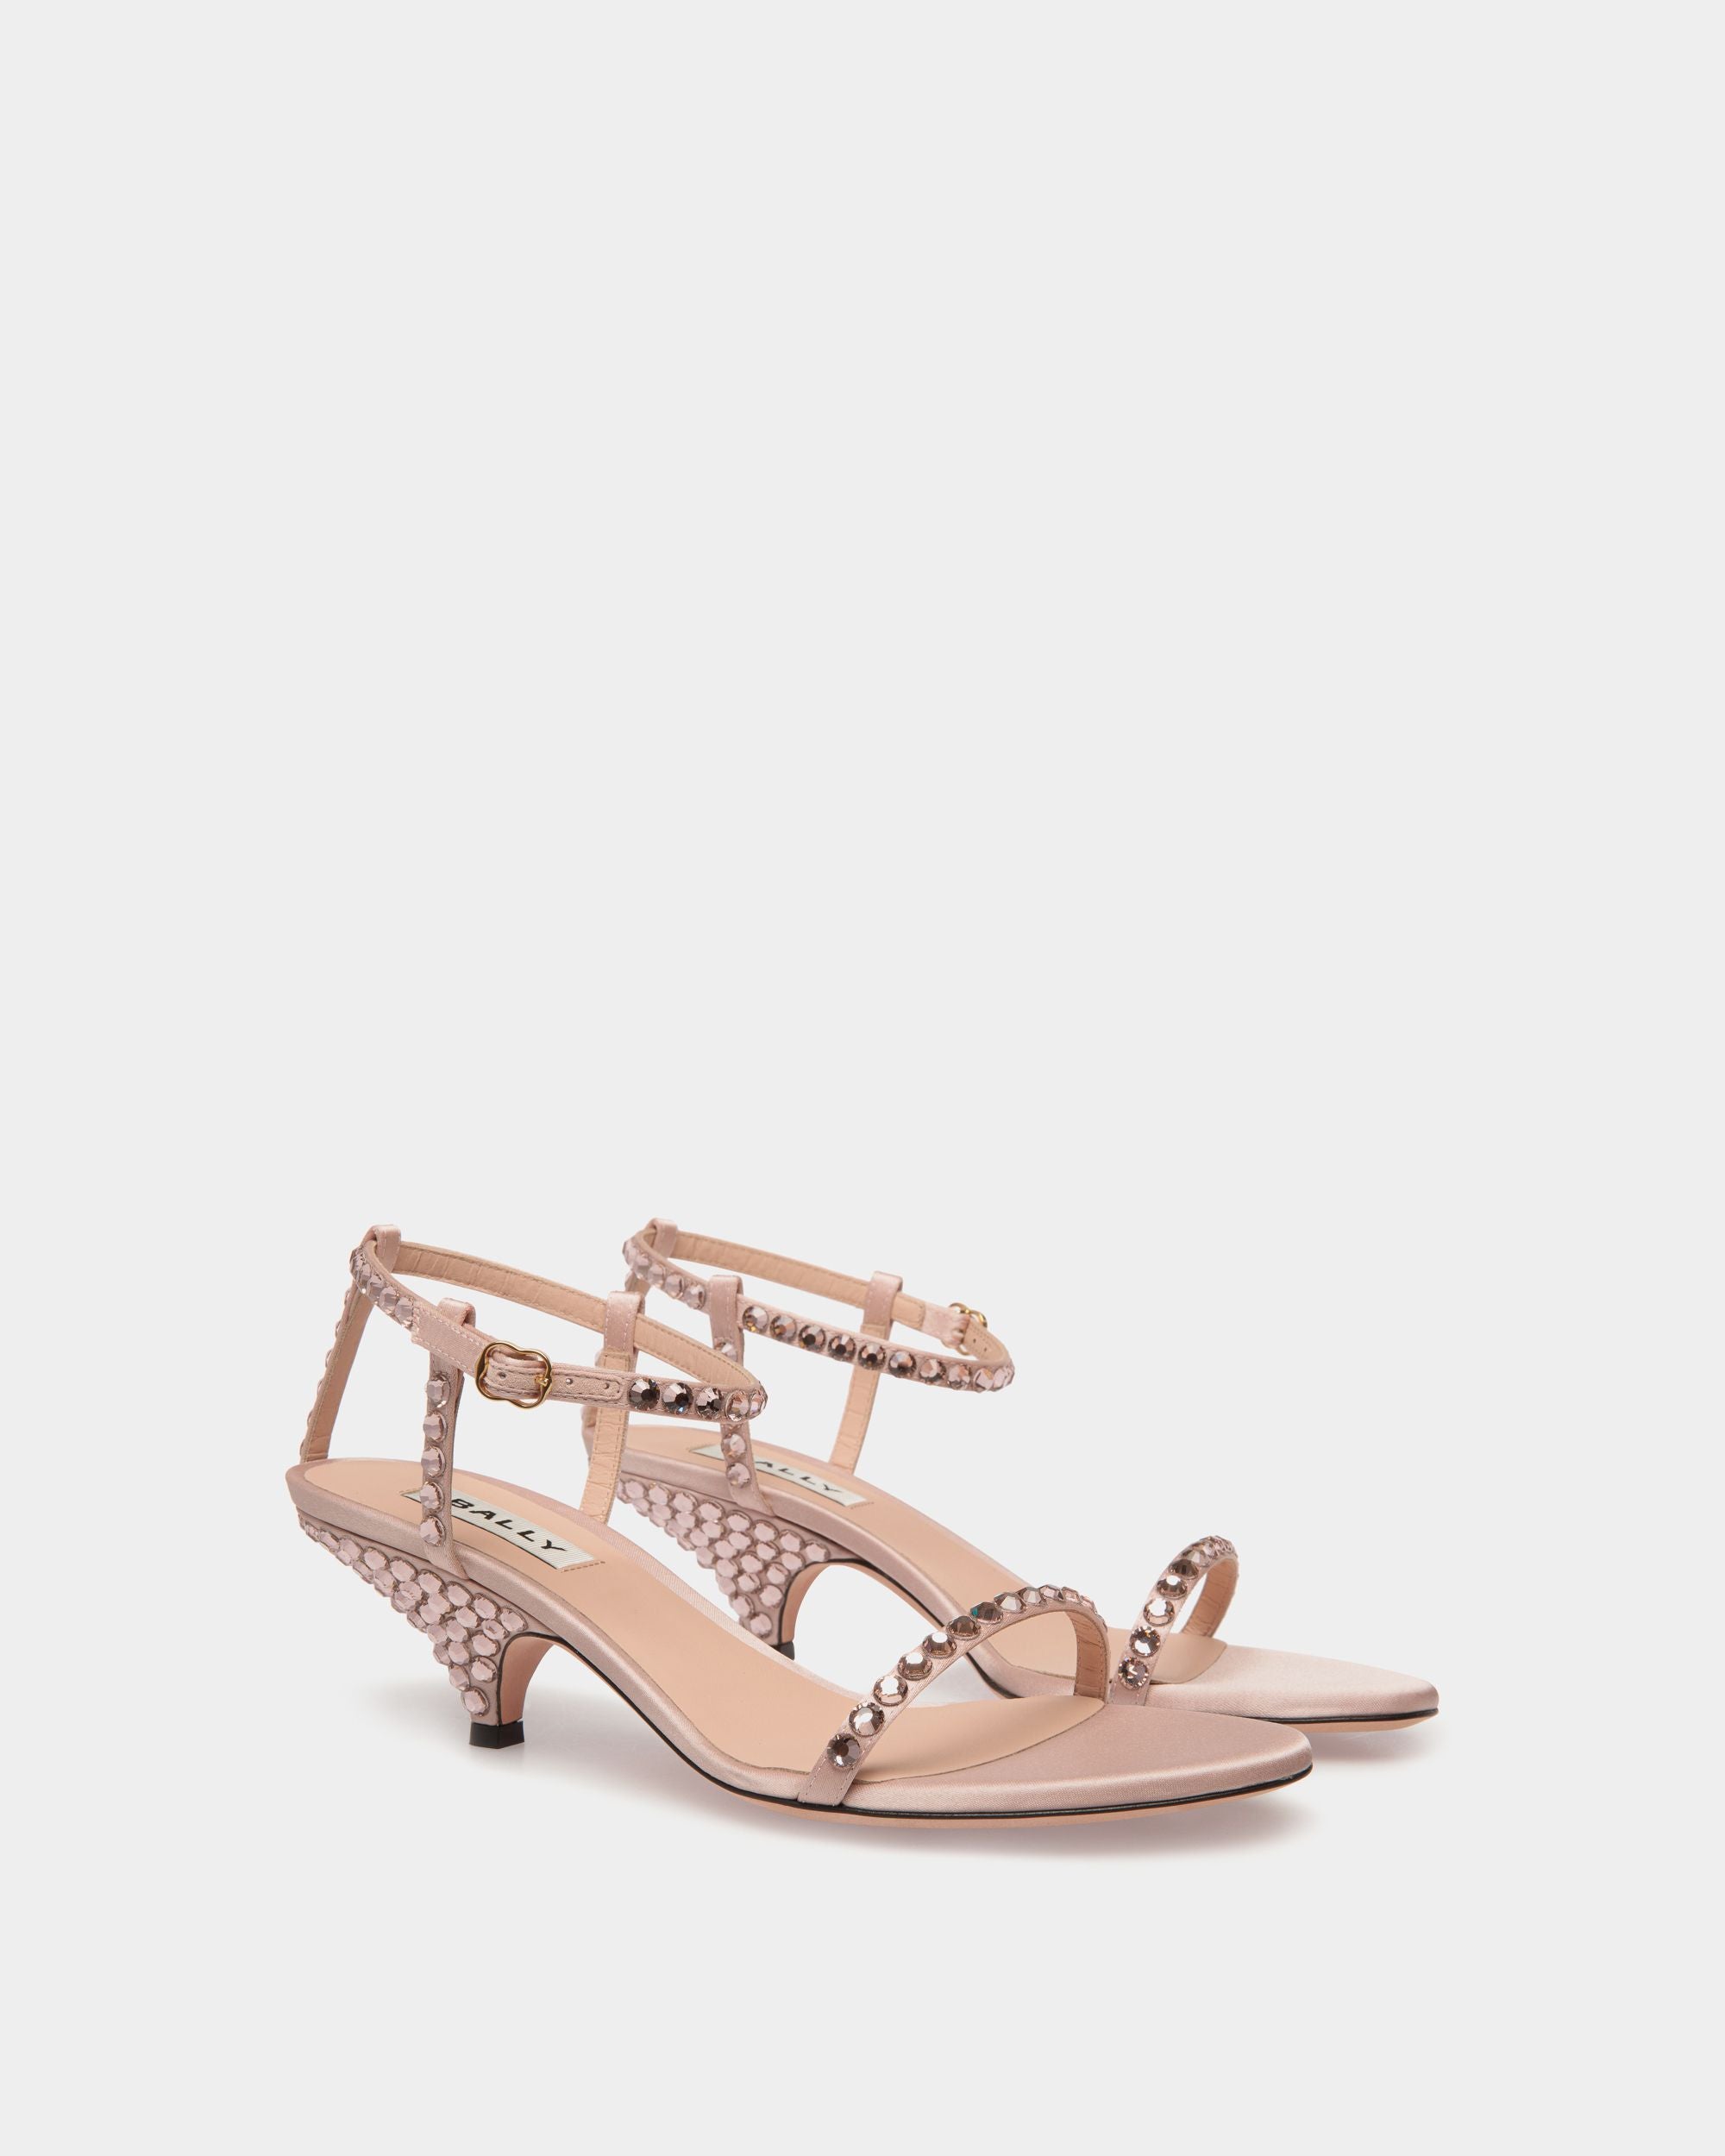 Katy | Women's Heeled Sandal in Light Pink Fabric with Crystals | Bally | Still Life 3/4 Front